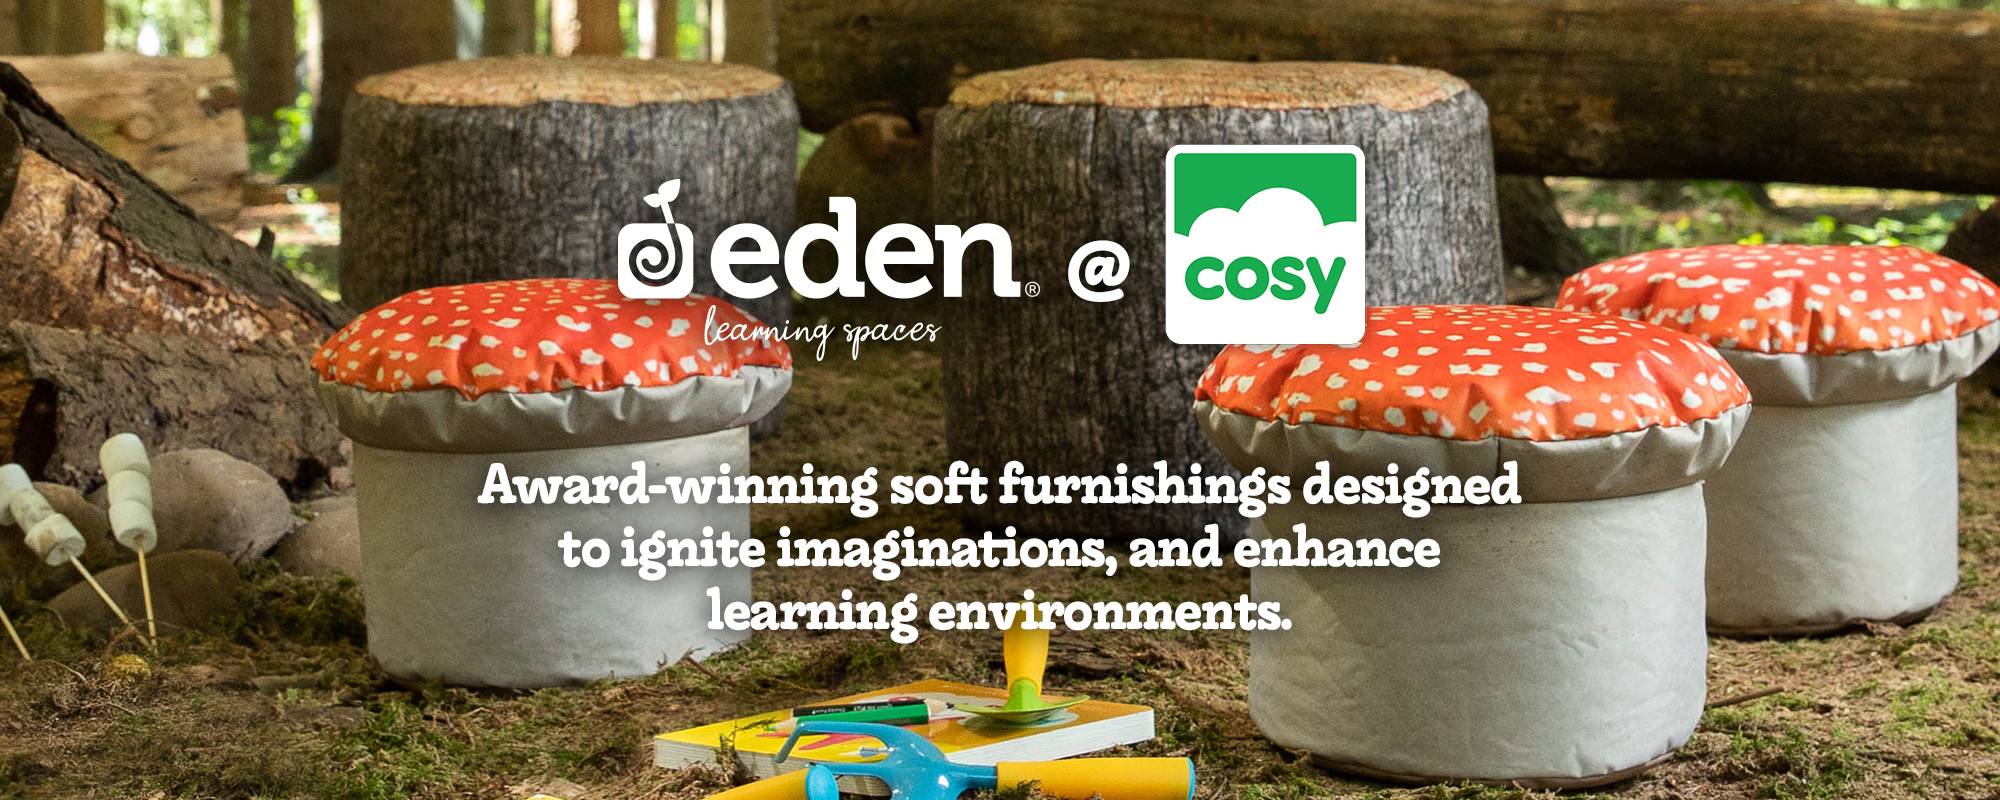 Eden Learning Spaces